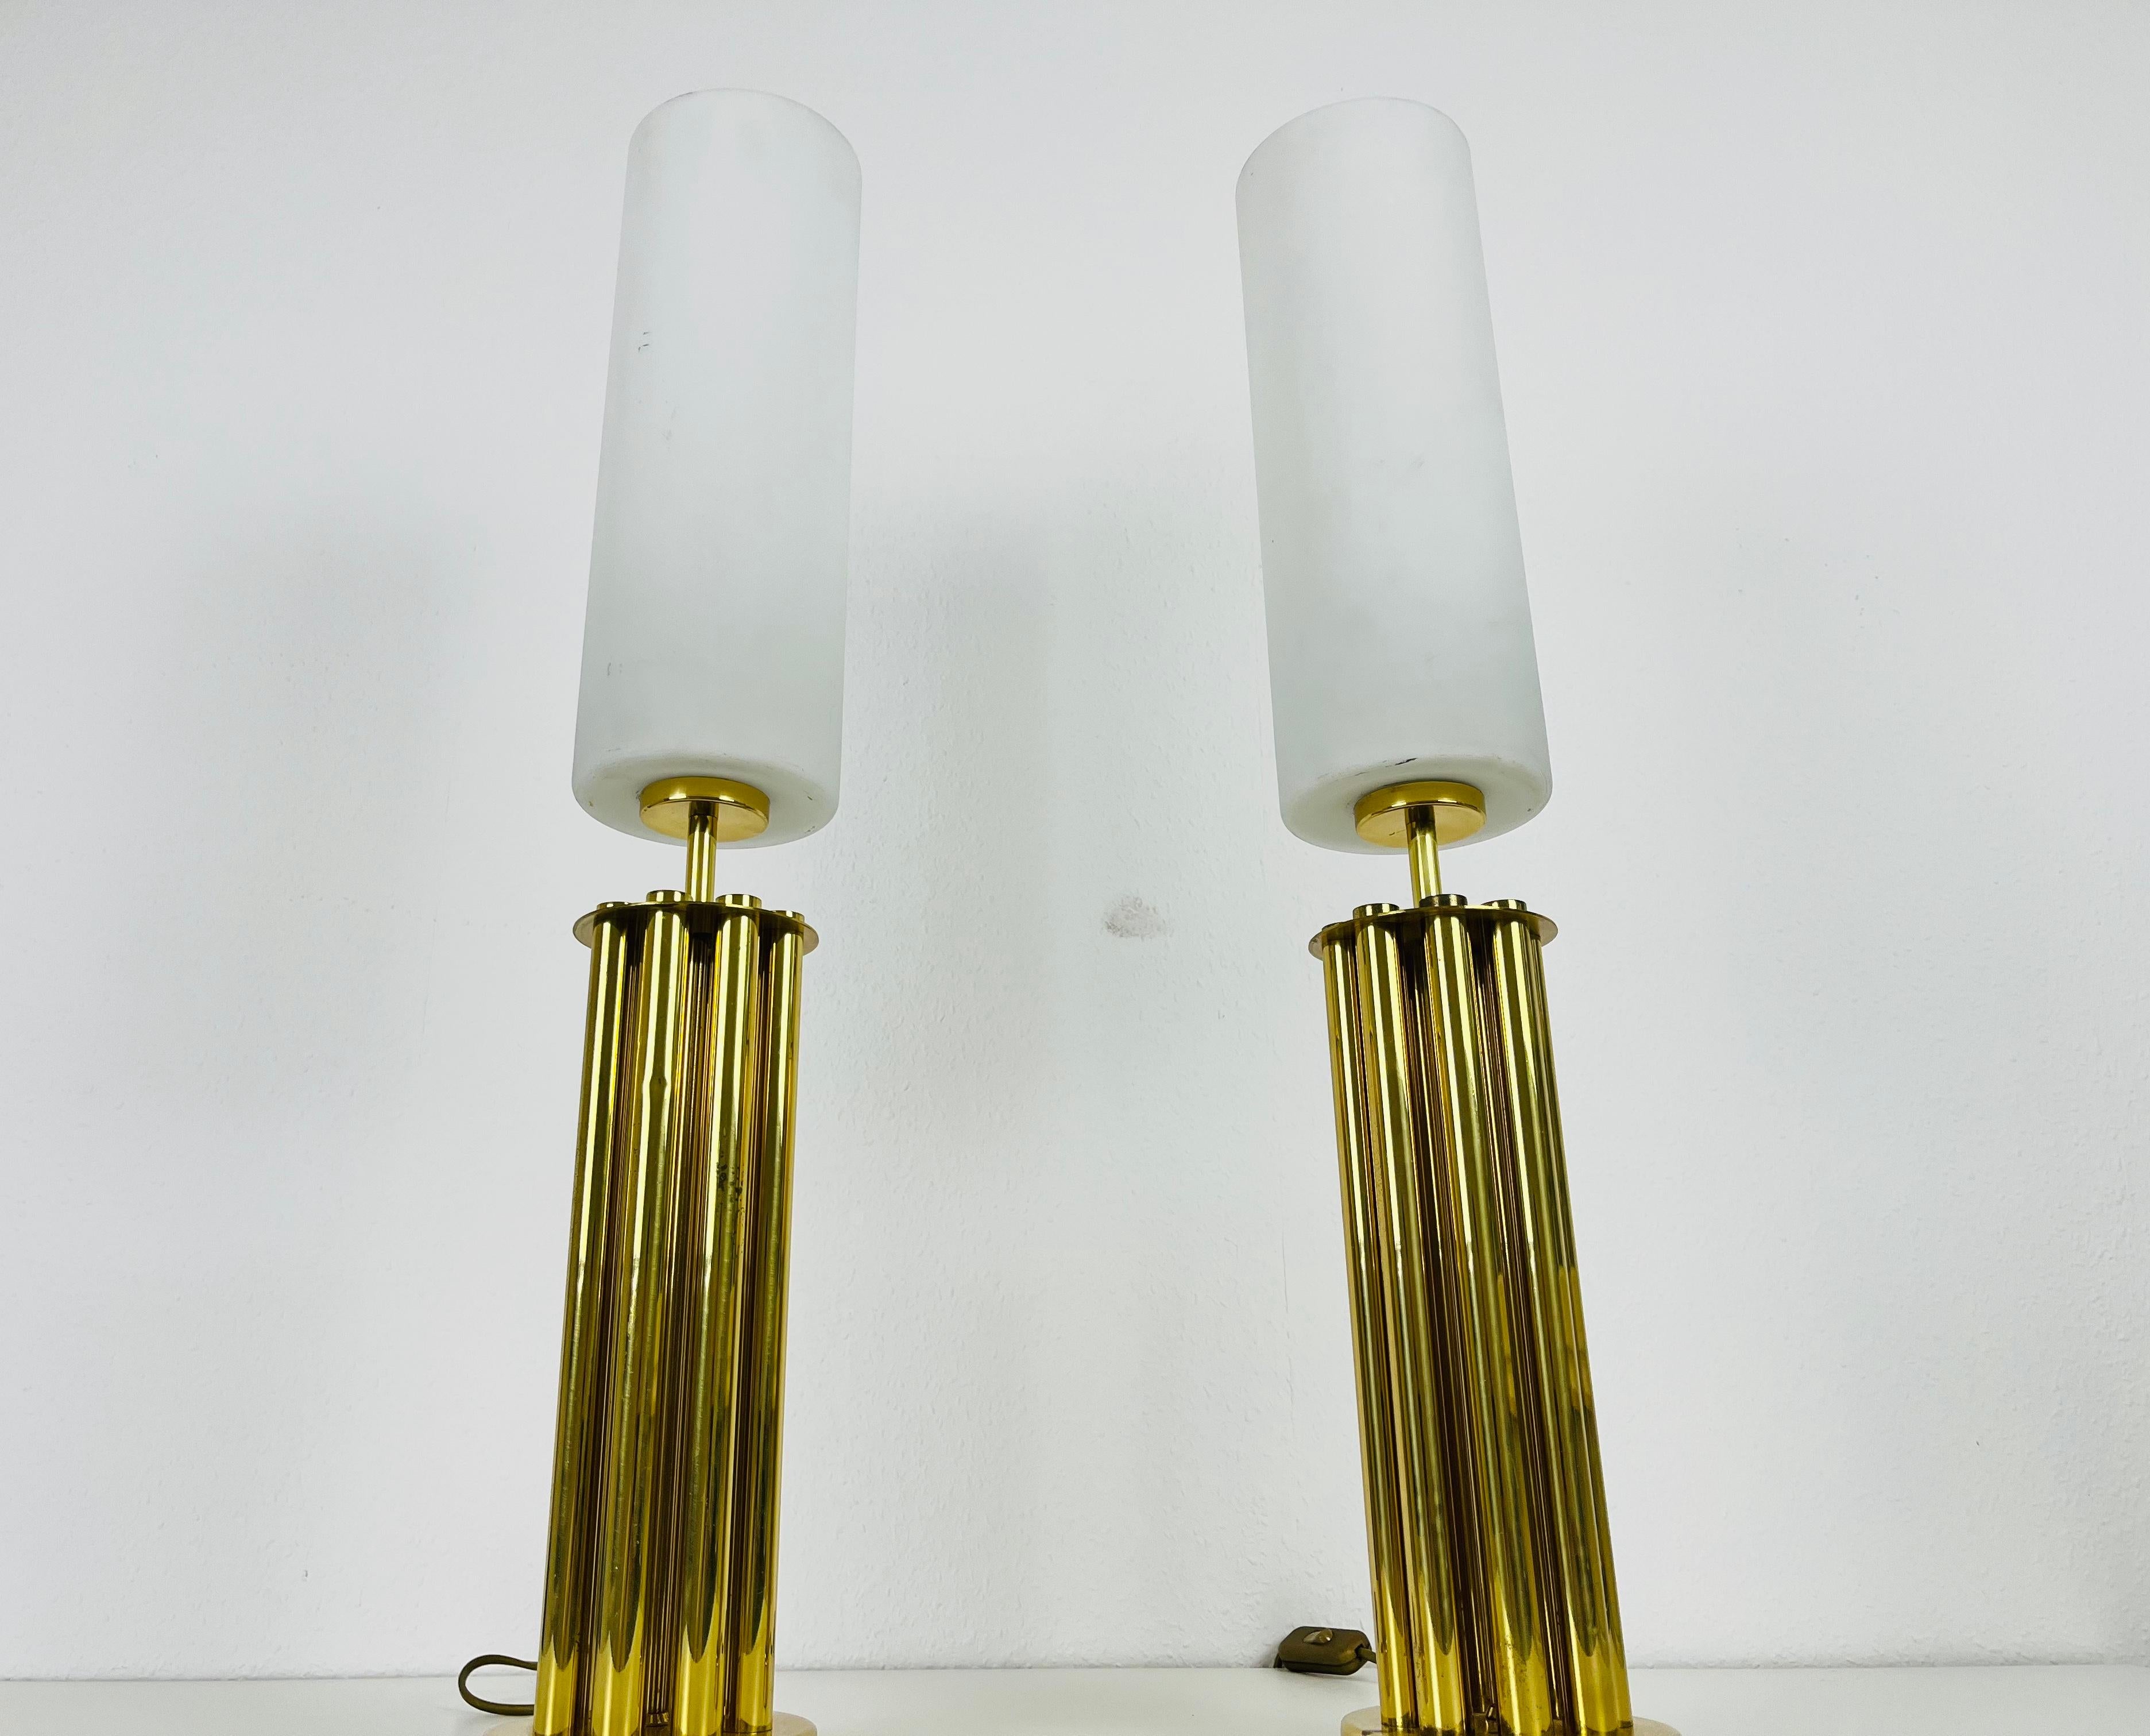 French Mid-Century Modern Brass Table Lamps, Pair, 1960s In Good Condition For Sale In Hagenbach, DE